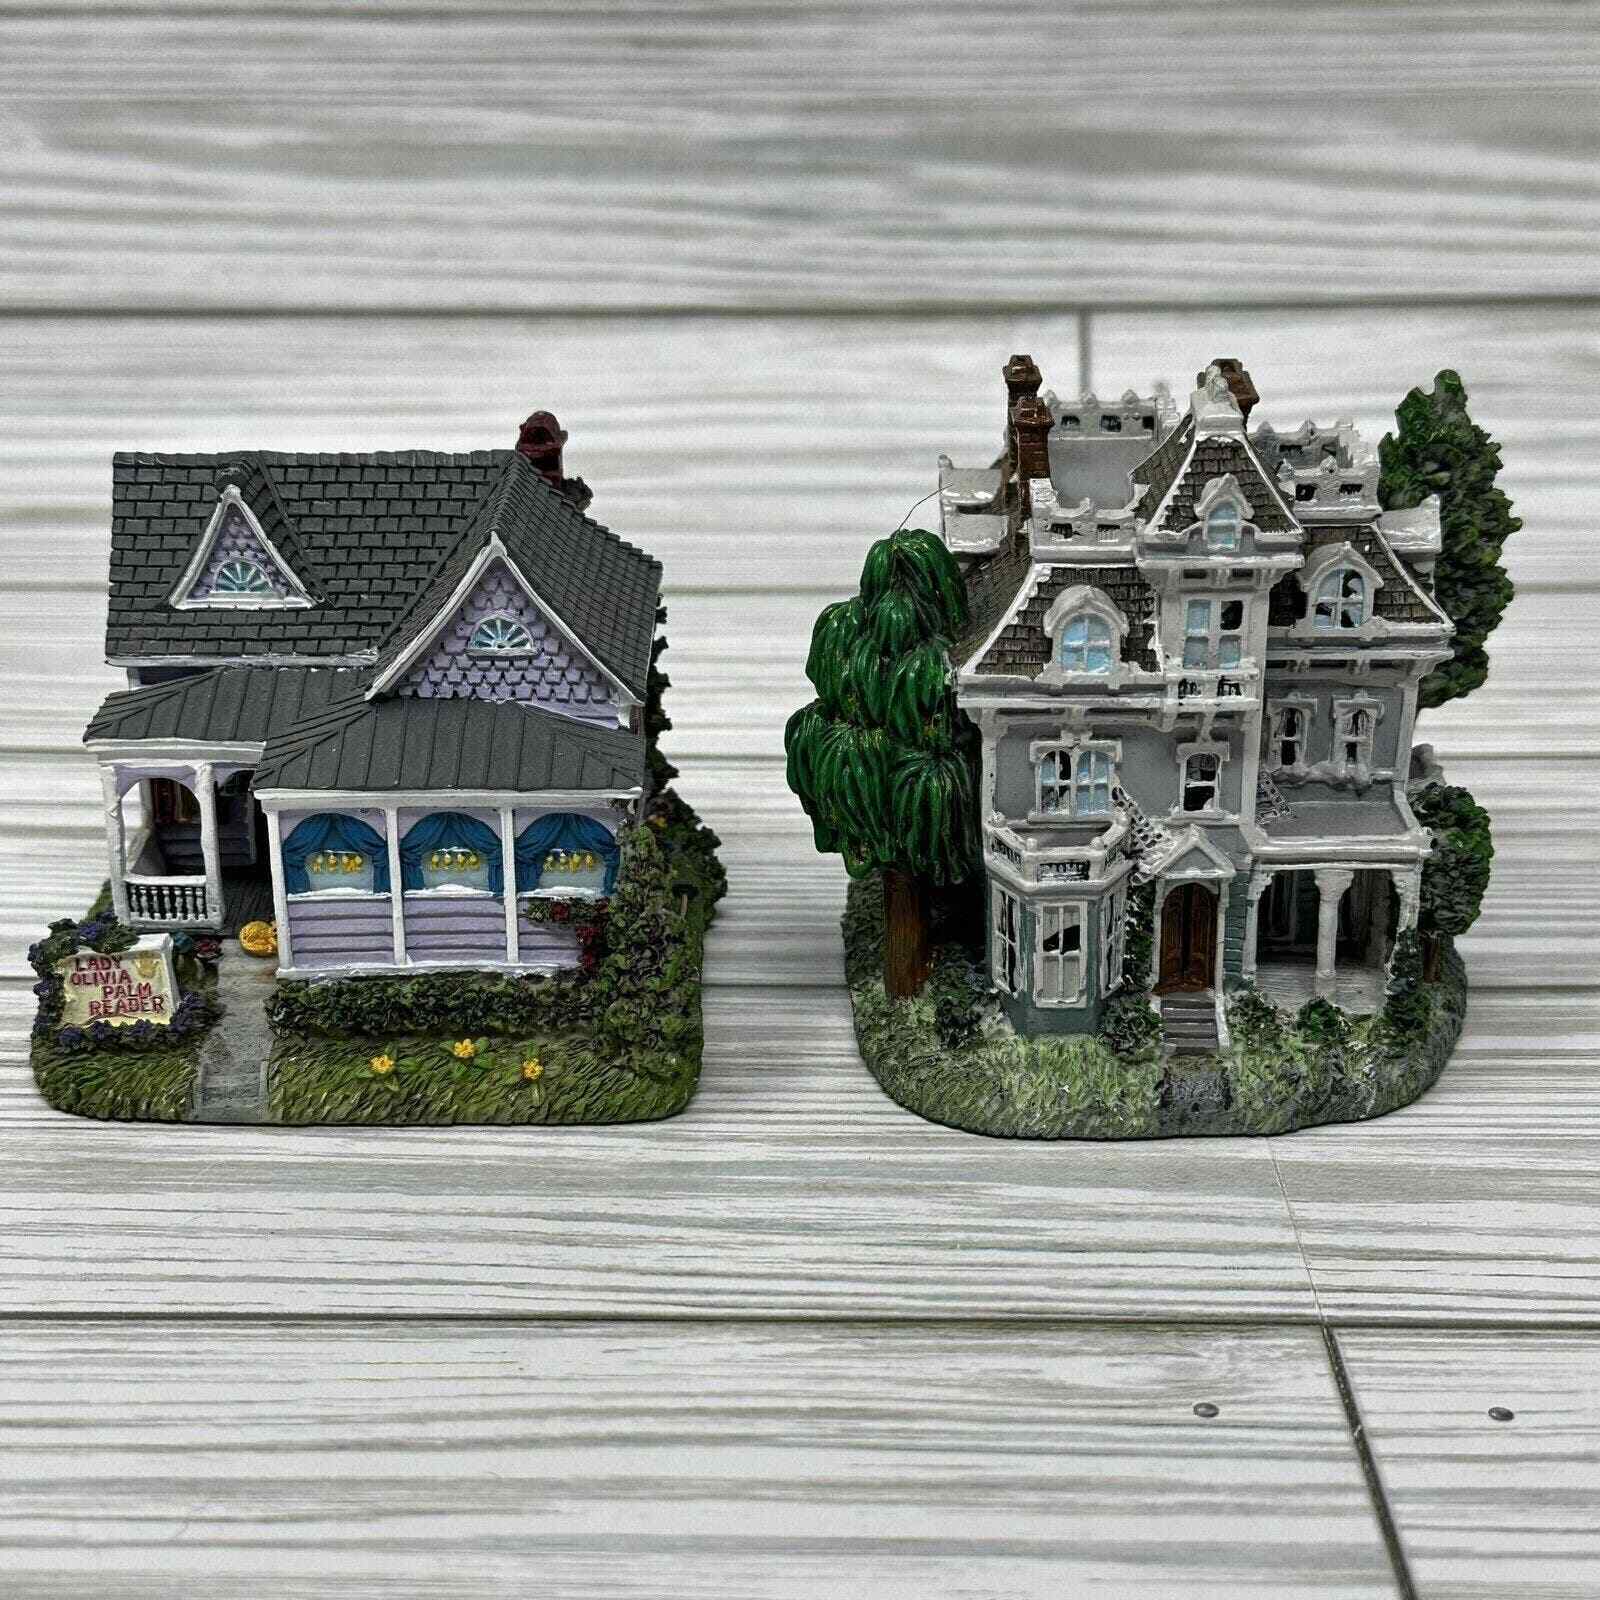 Liberty Falls Haunted House AH227 Palm Reader\'s Cottage AH234 2001 Mini Building